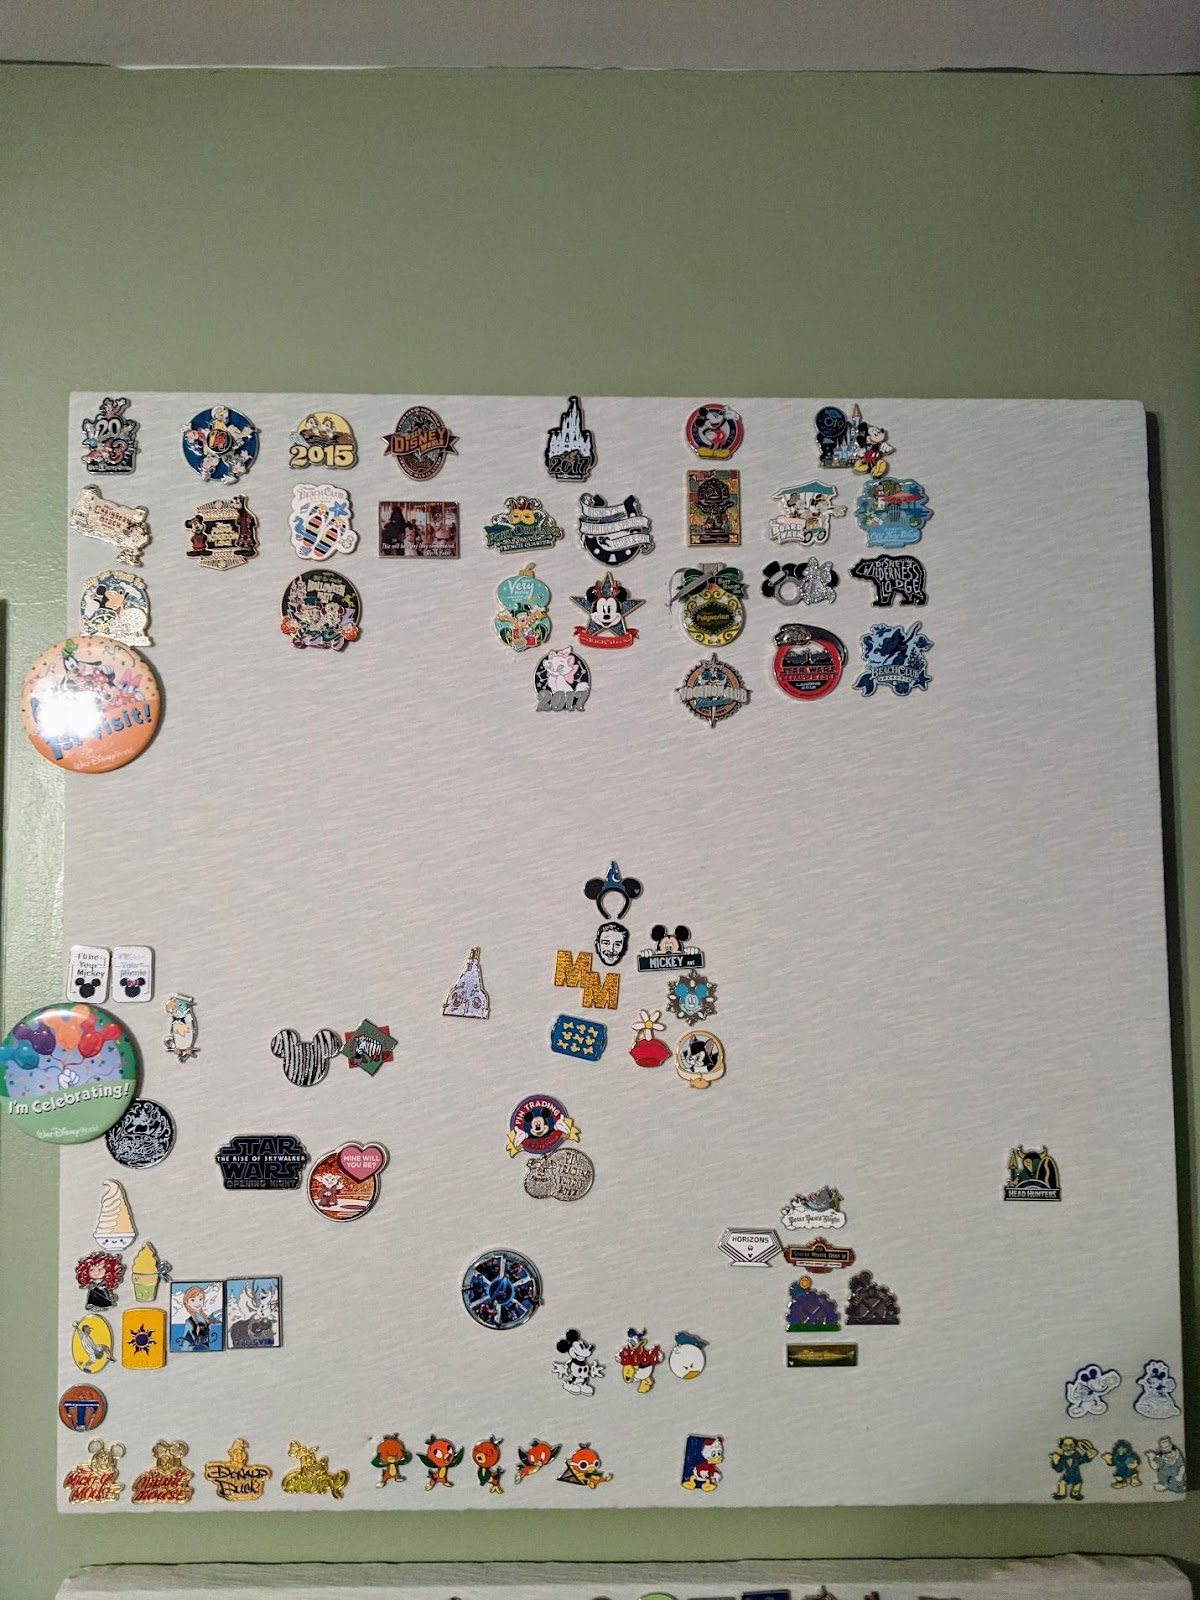 Our disney pin trading board that commemorates our trips!